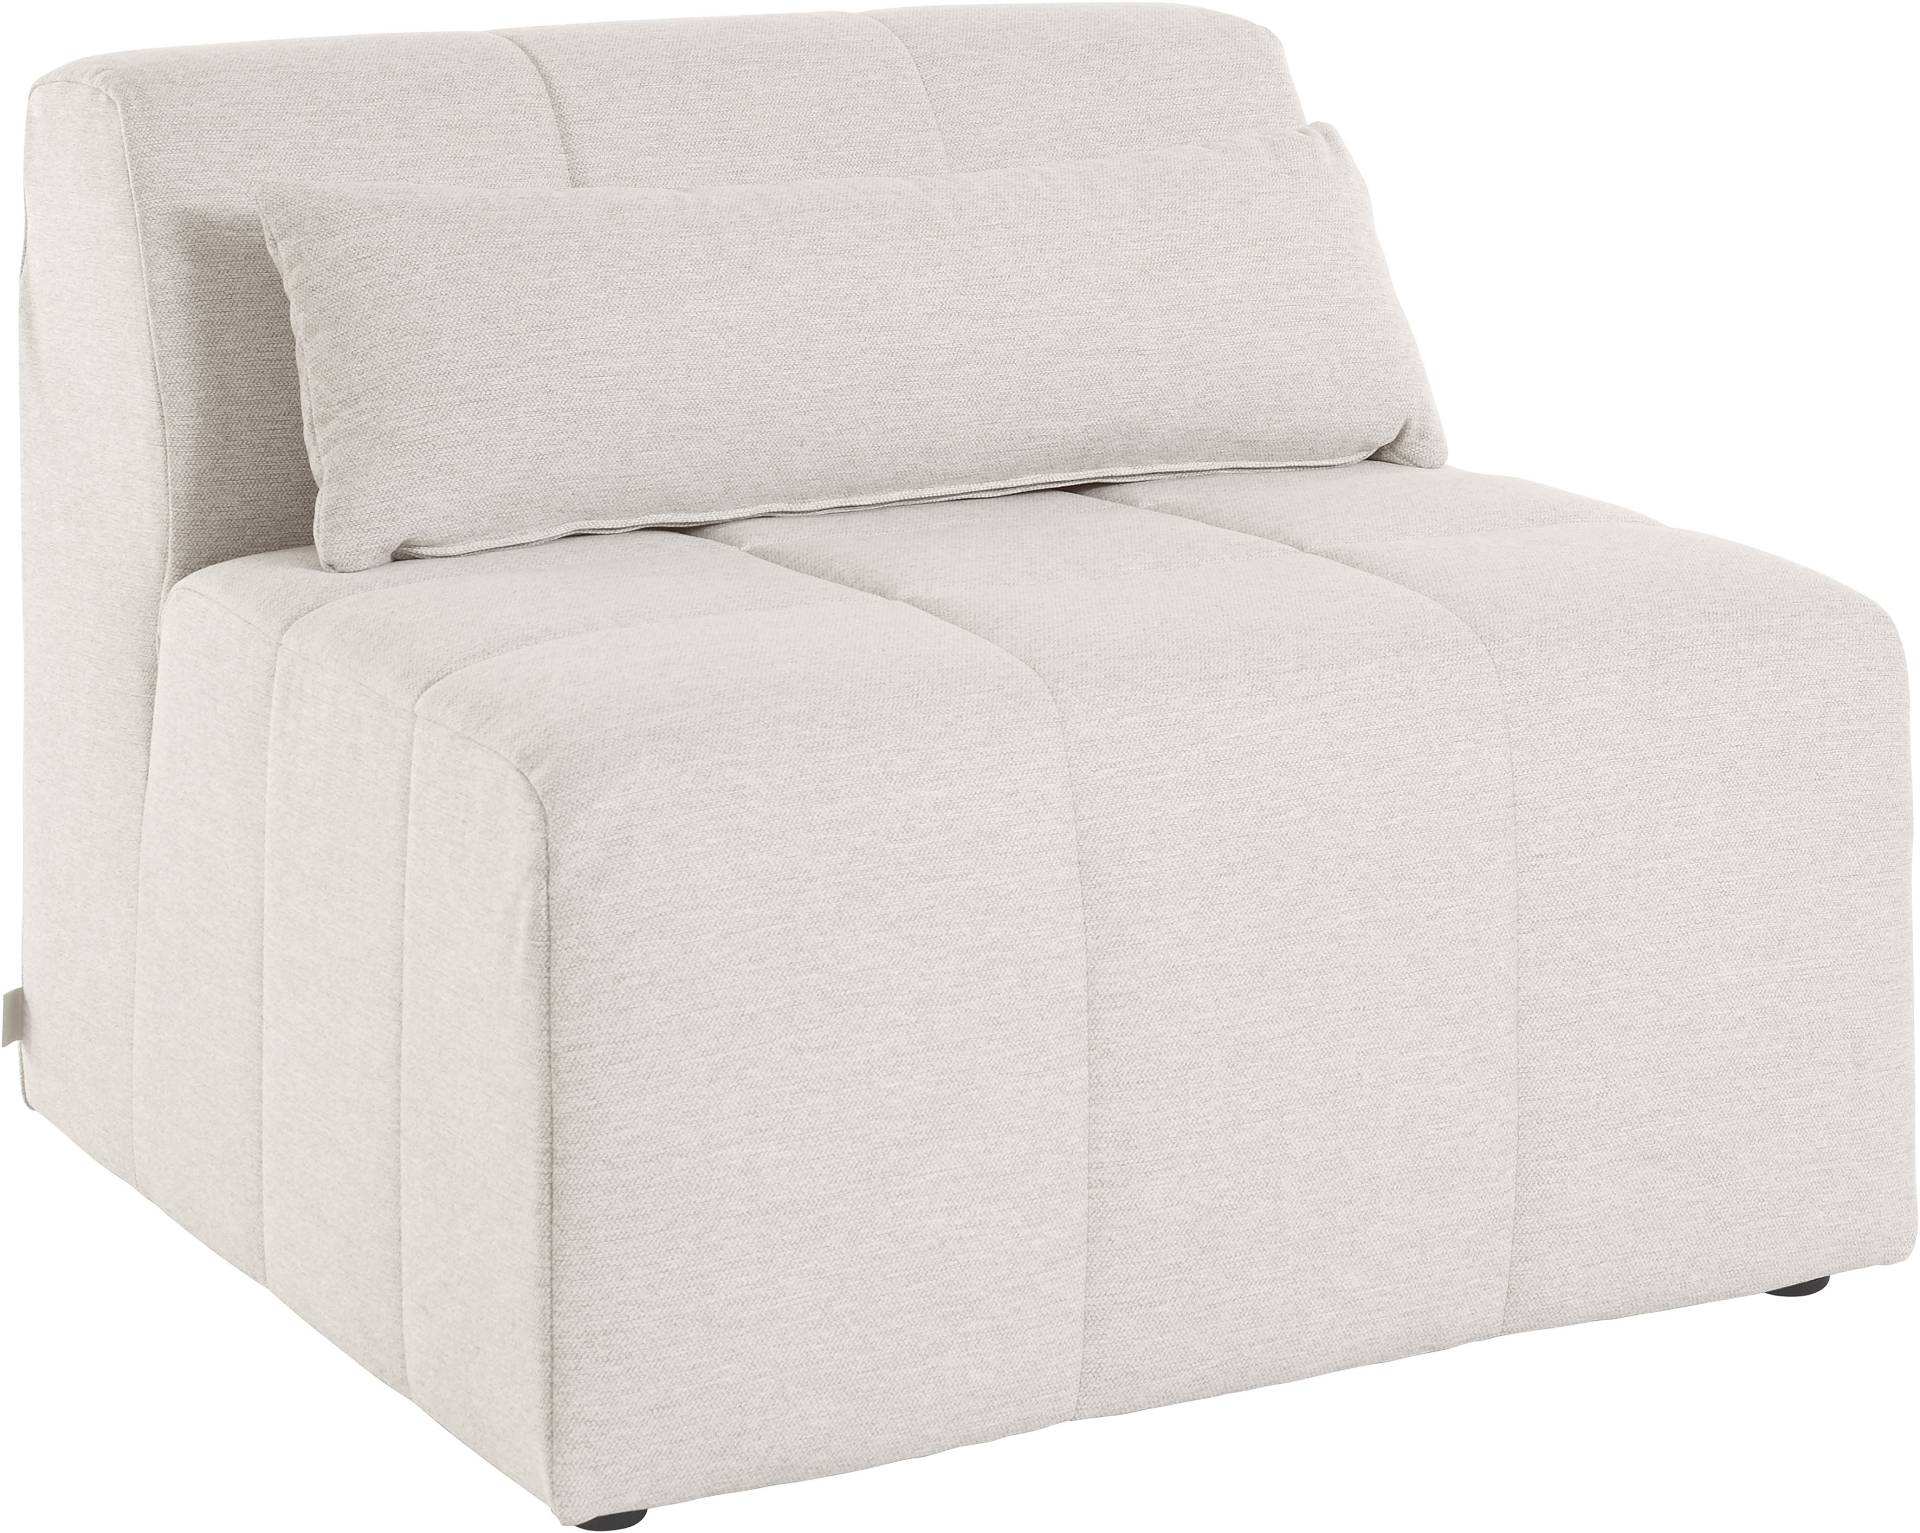 LeGer Home by Lena Gercke Sofa-Mittelelement »Maileen« von LeGer Home by Lena Gercke